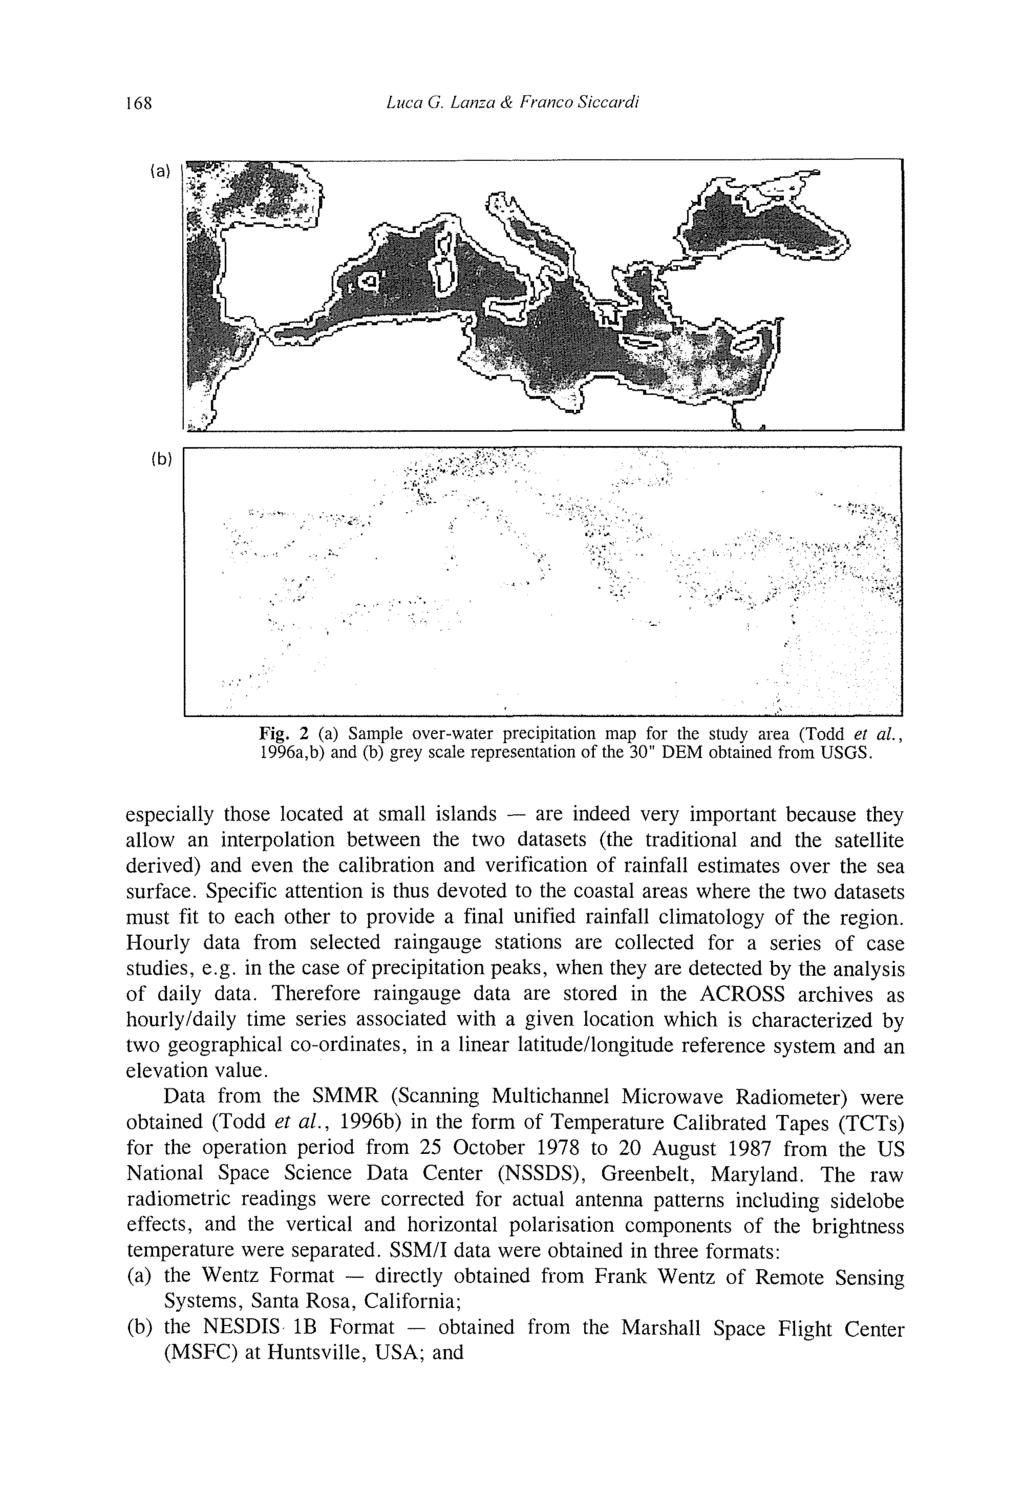 168 Luca G. Lanza & Franco Siccardi Fig. 2 (a) Sample over-water precipitation map for the study area (Todd et ai, 1996a,b) and (b) grey scale representation of the 30" DEM obtained from USGS.